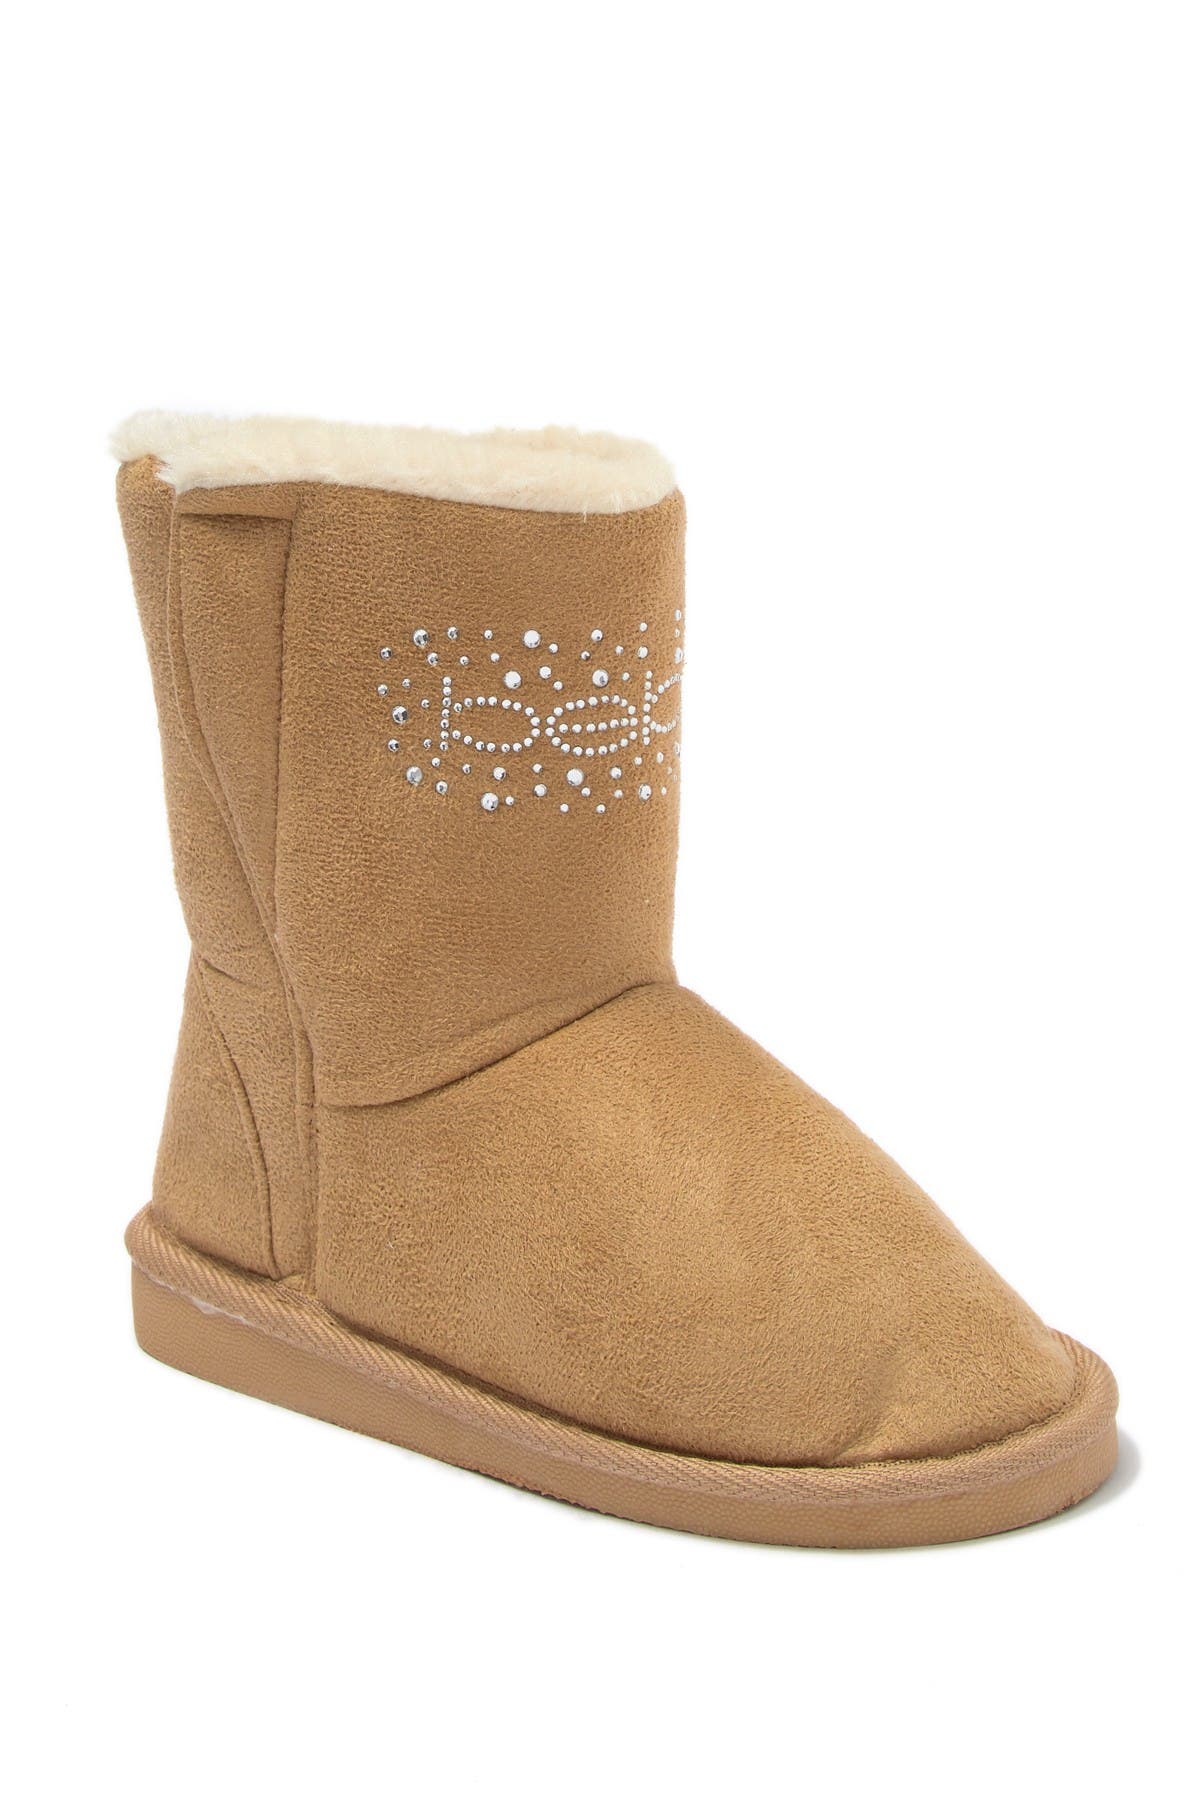 Microsuede Faux Fur Lined Winter Boot 